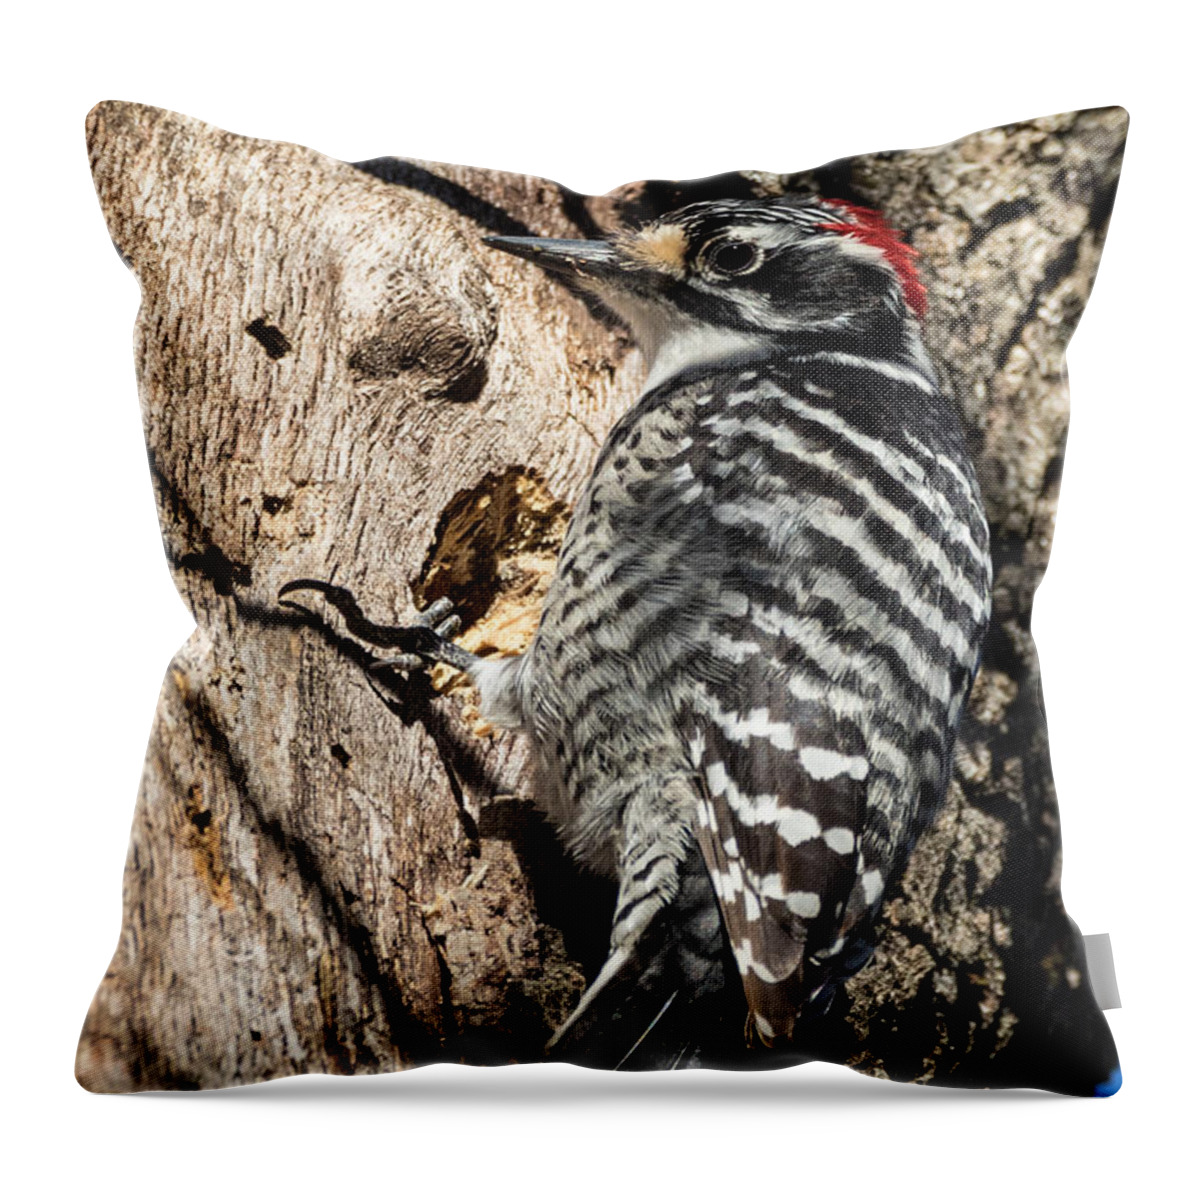 Woodpecker Throw Pillow featuring the photograph Nuttall's Woodpecker by Kathleen Bishop